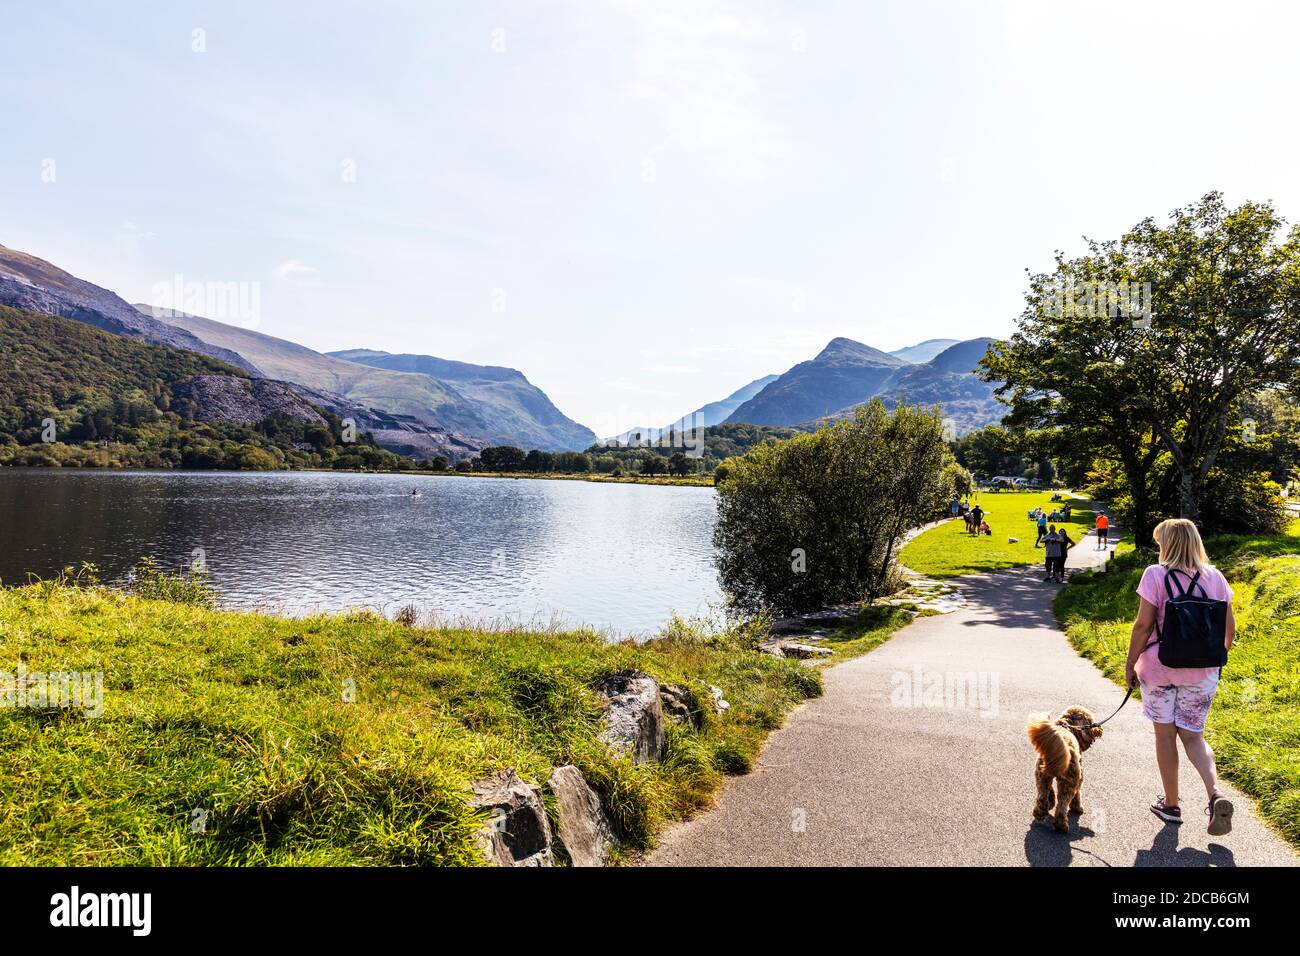 Llanberis in the Snowdonia National Park, northern shore of Llyn Padarn in north Wales in the Snowdonia National Park, Llyn Padarn, lake, Llanberis Stock Photo